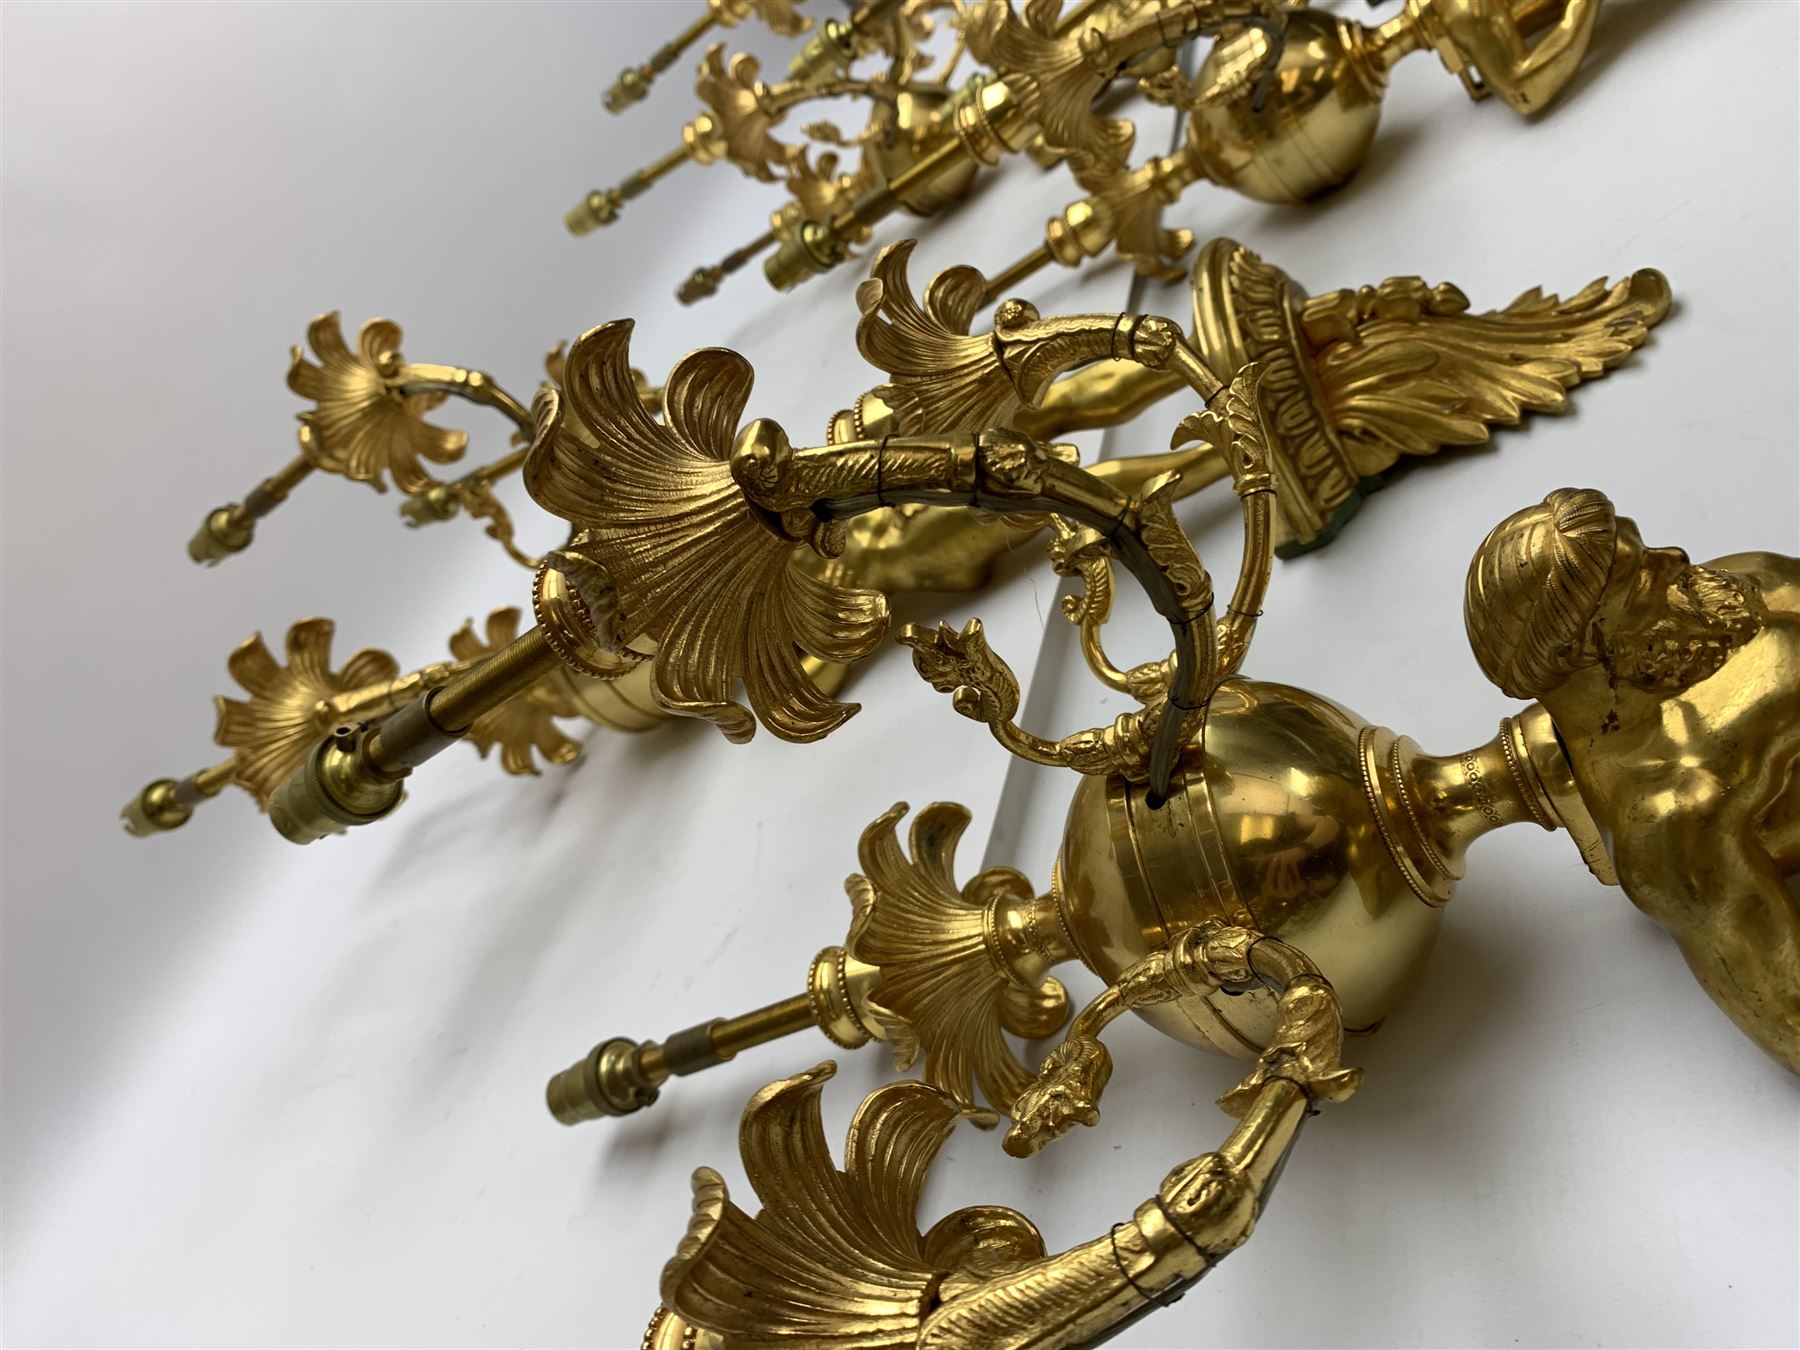 Pair of 19th century and later ormolu wall sconces - Image 6 of 6